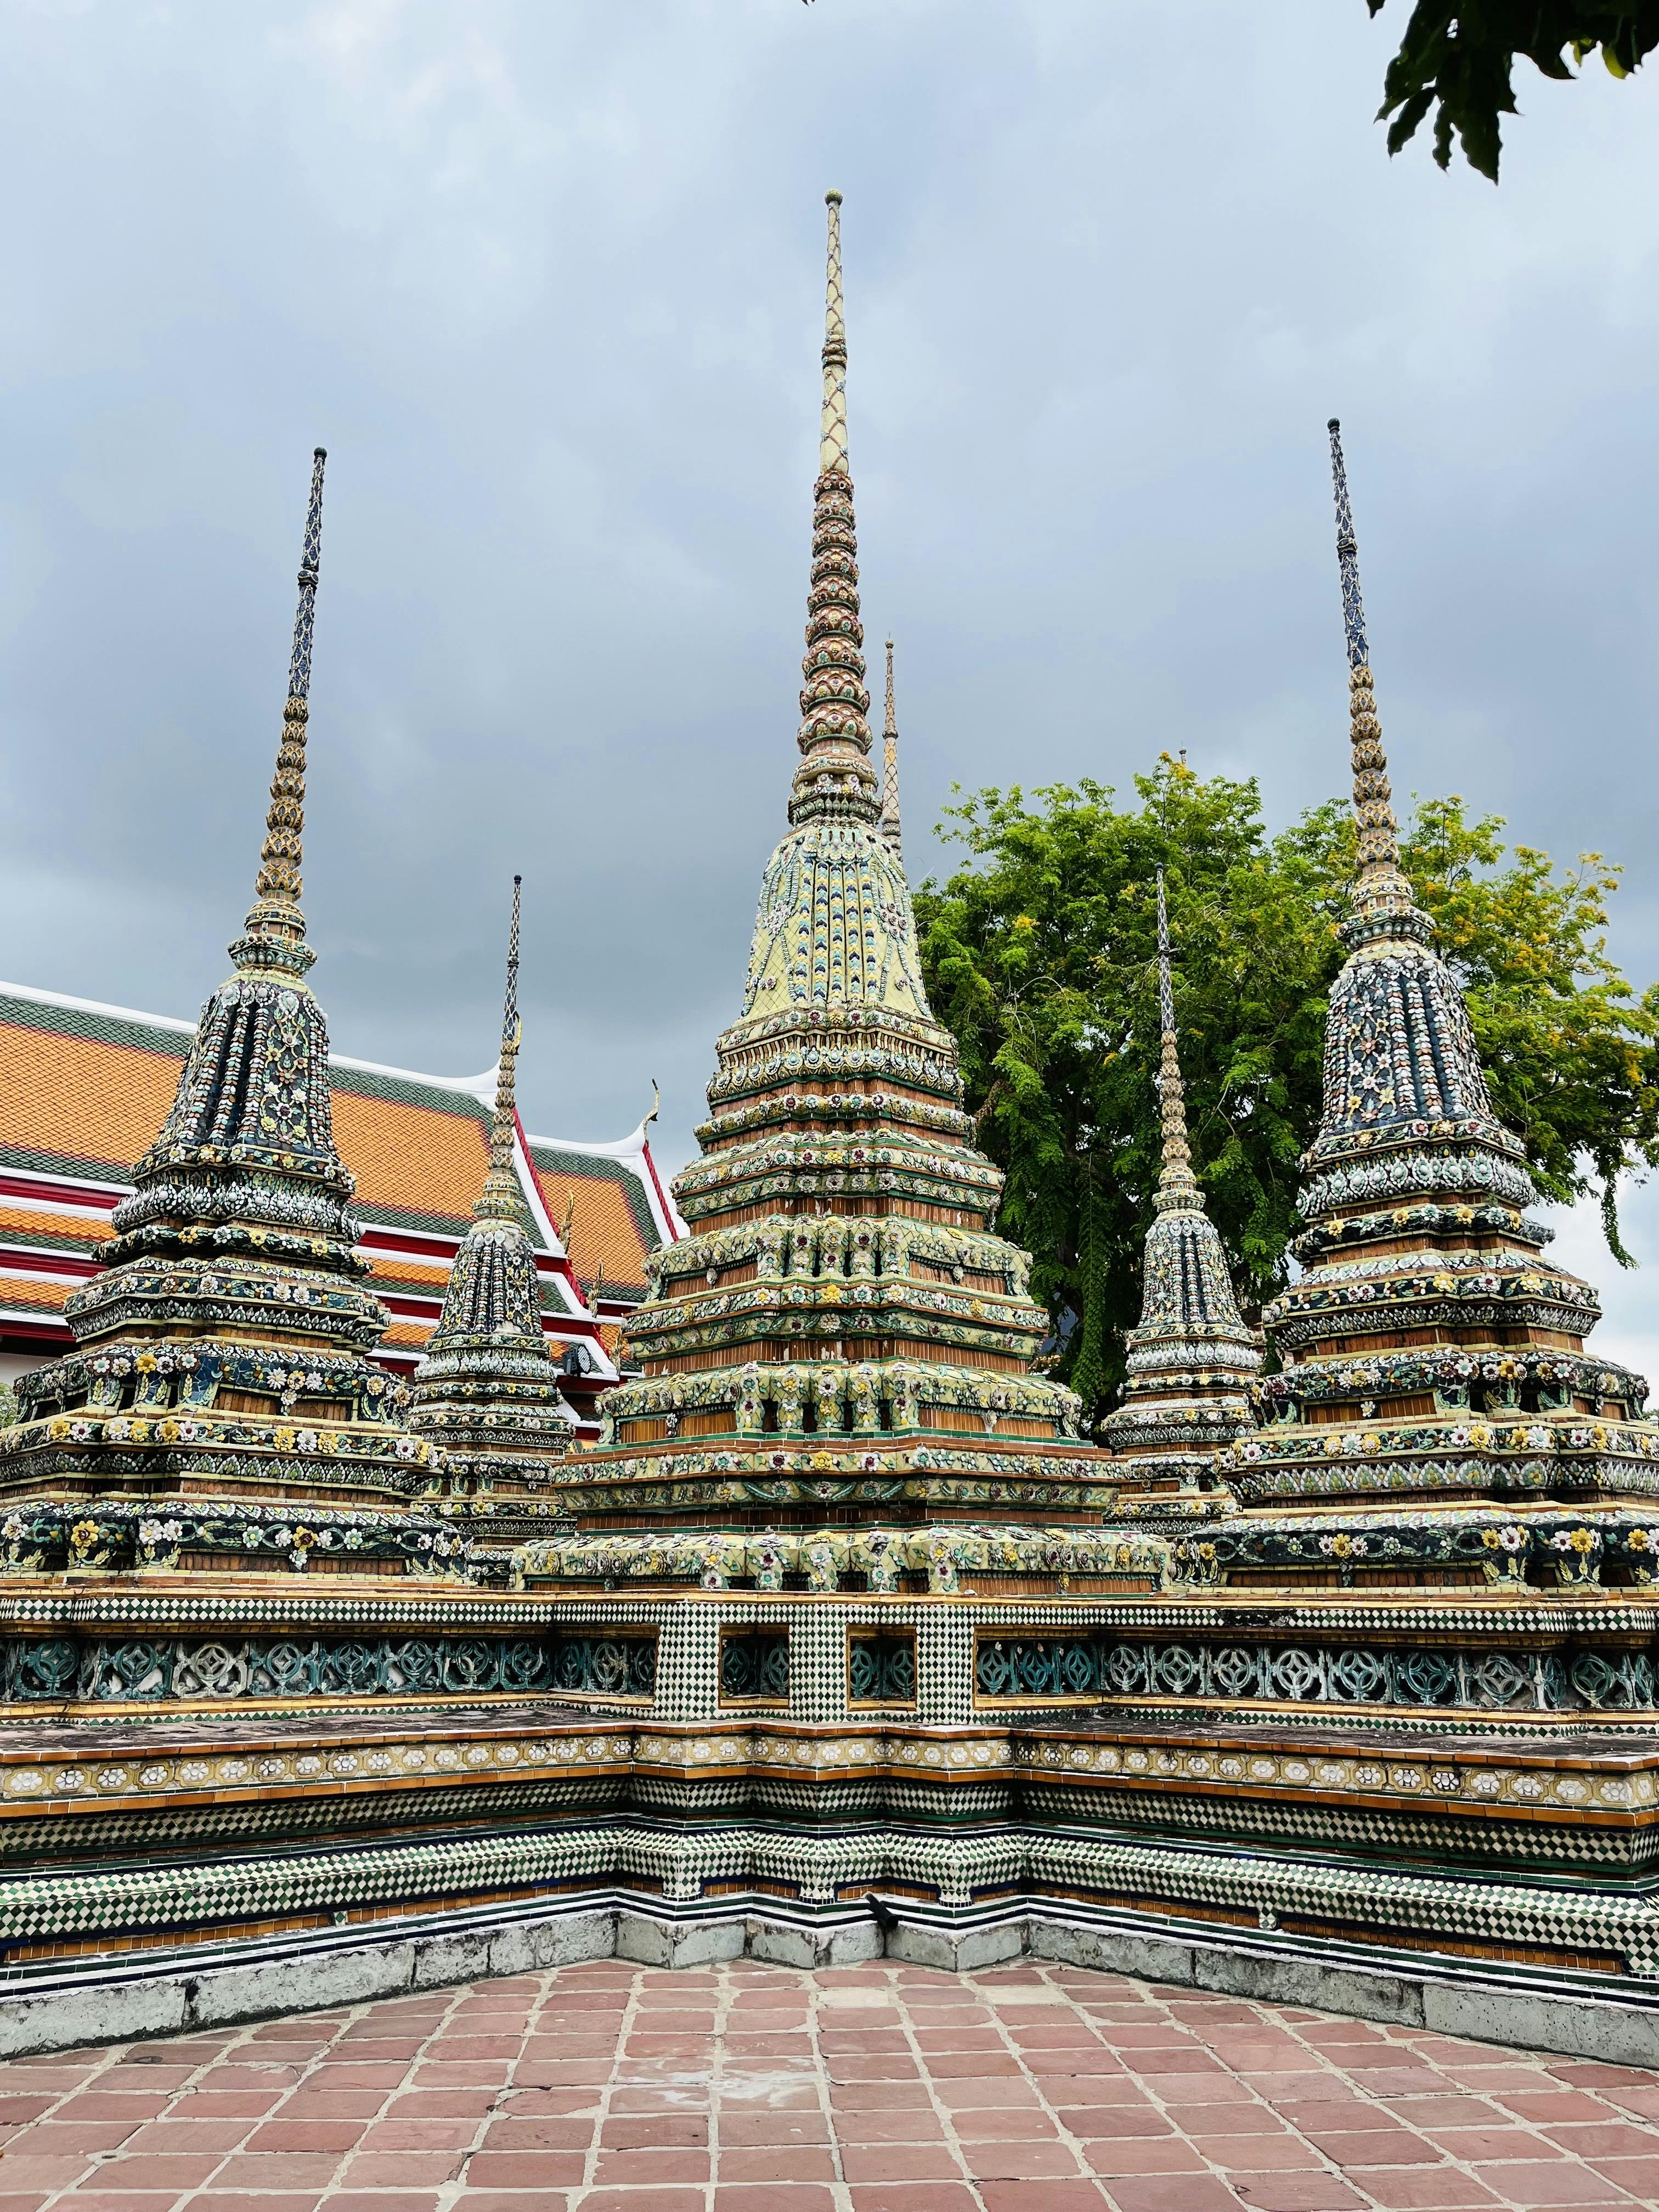 The Wat Pho Temple